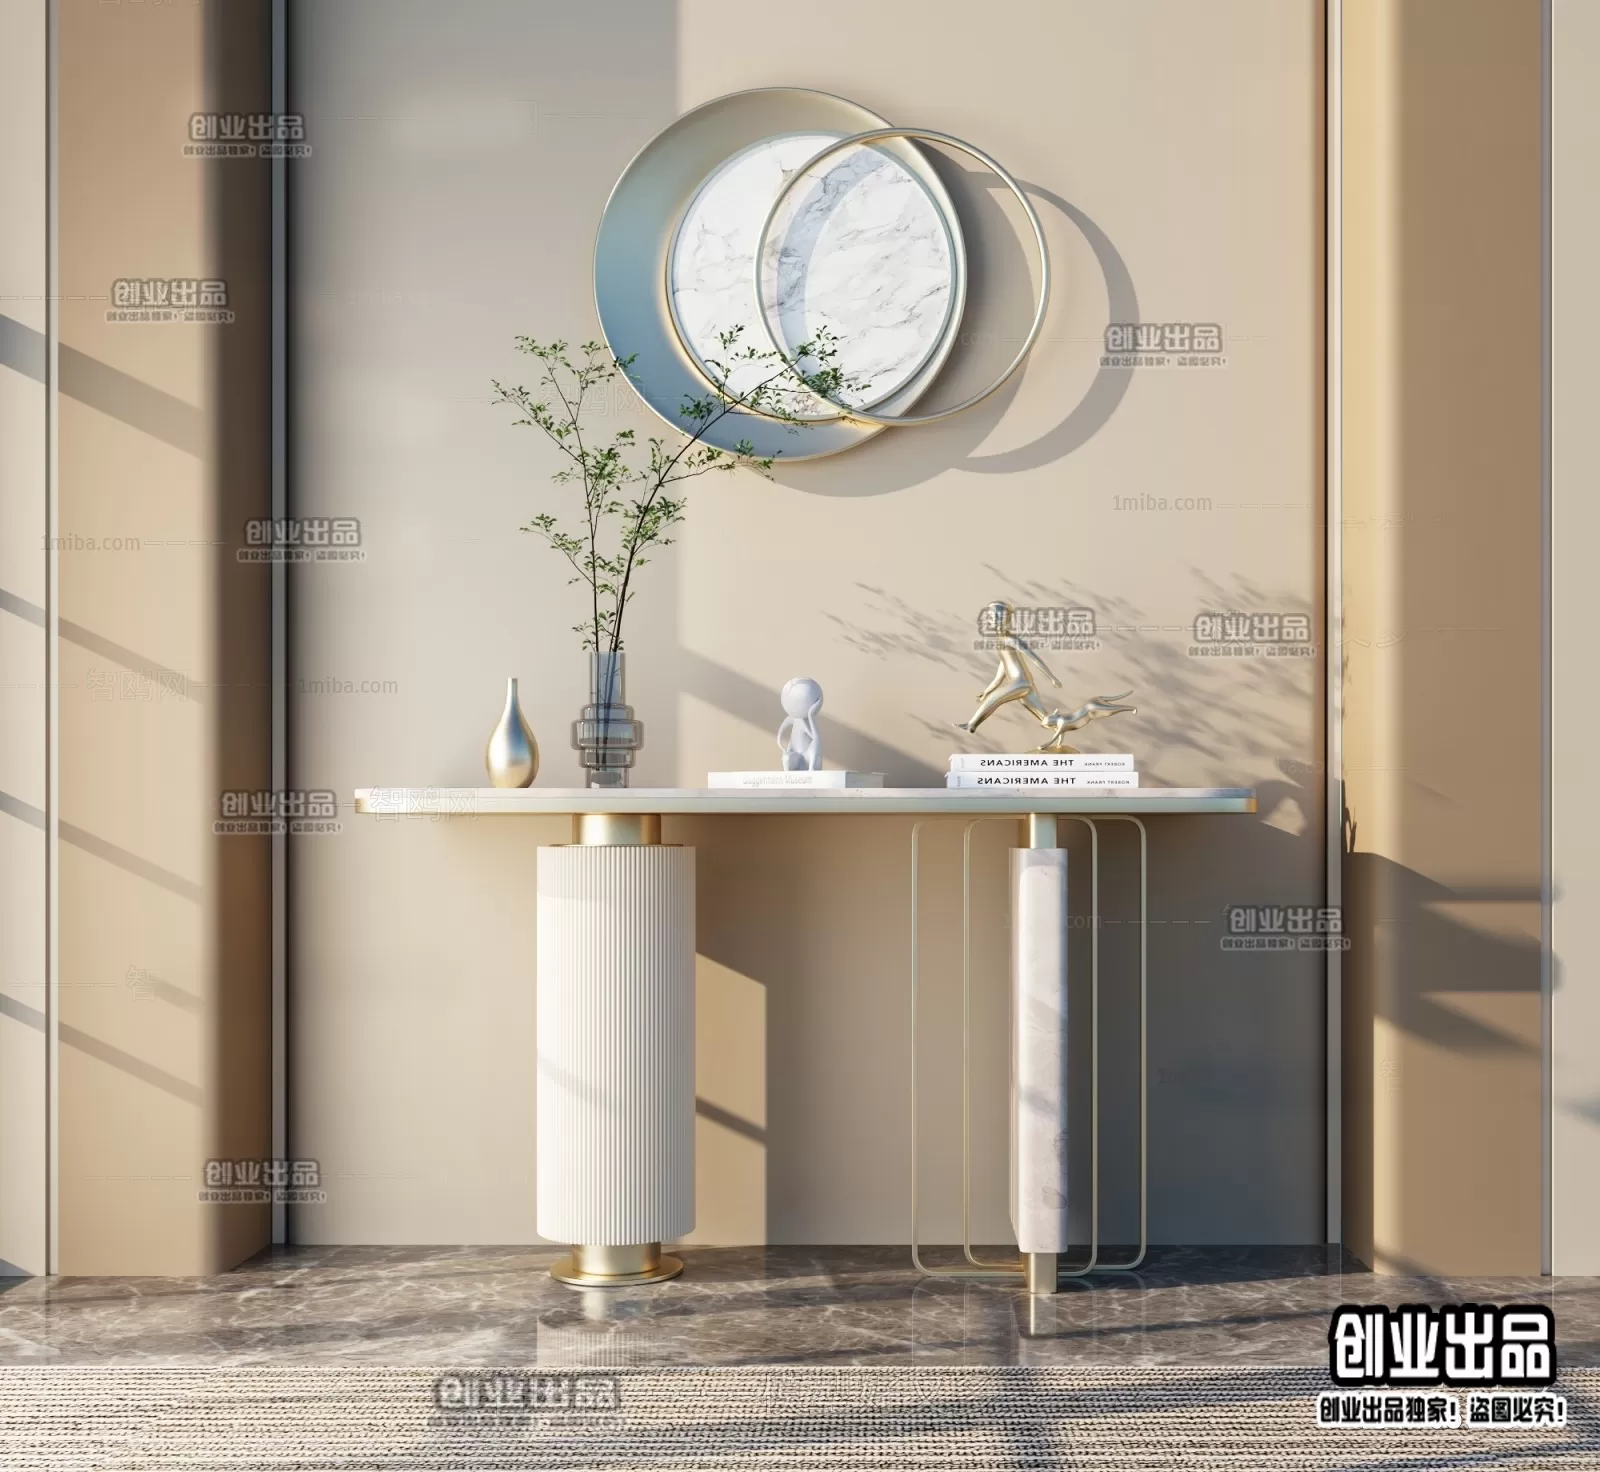 CONSOLE TABLE – 6 – FURNITURE 3D MODELS 2022 (VRAY)